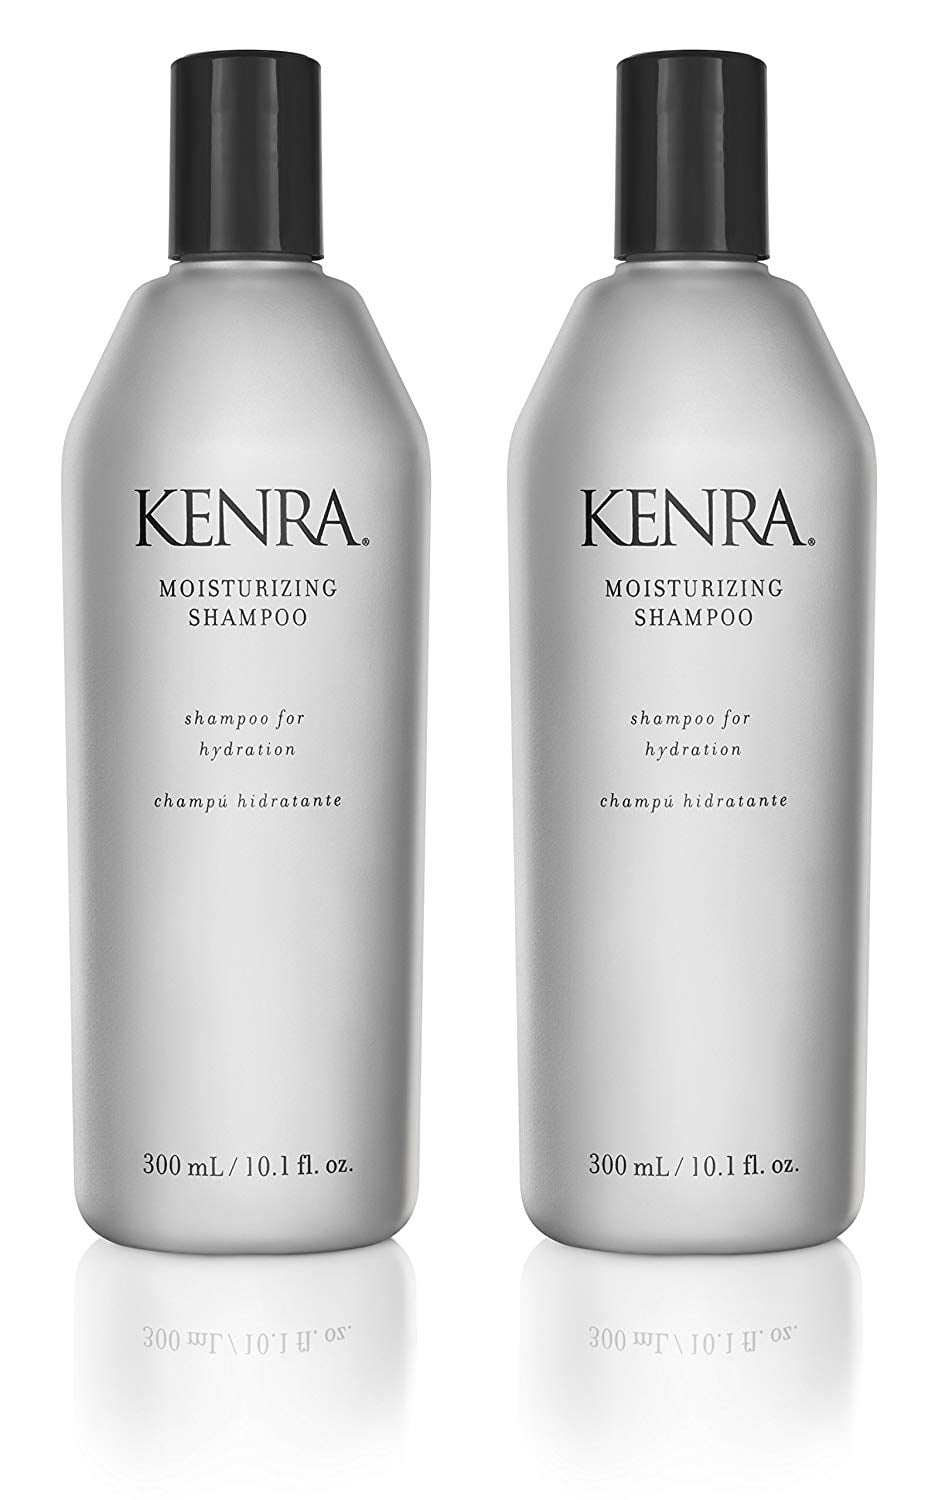 Kenra hair products